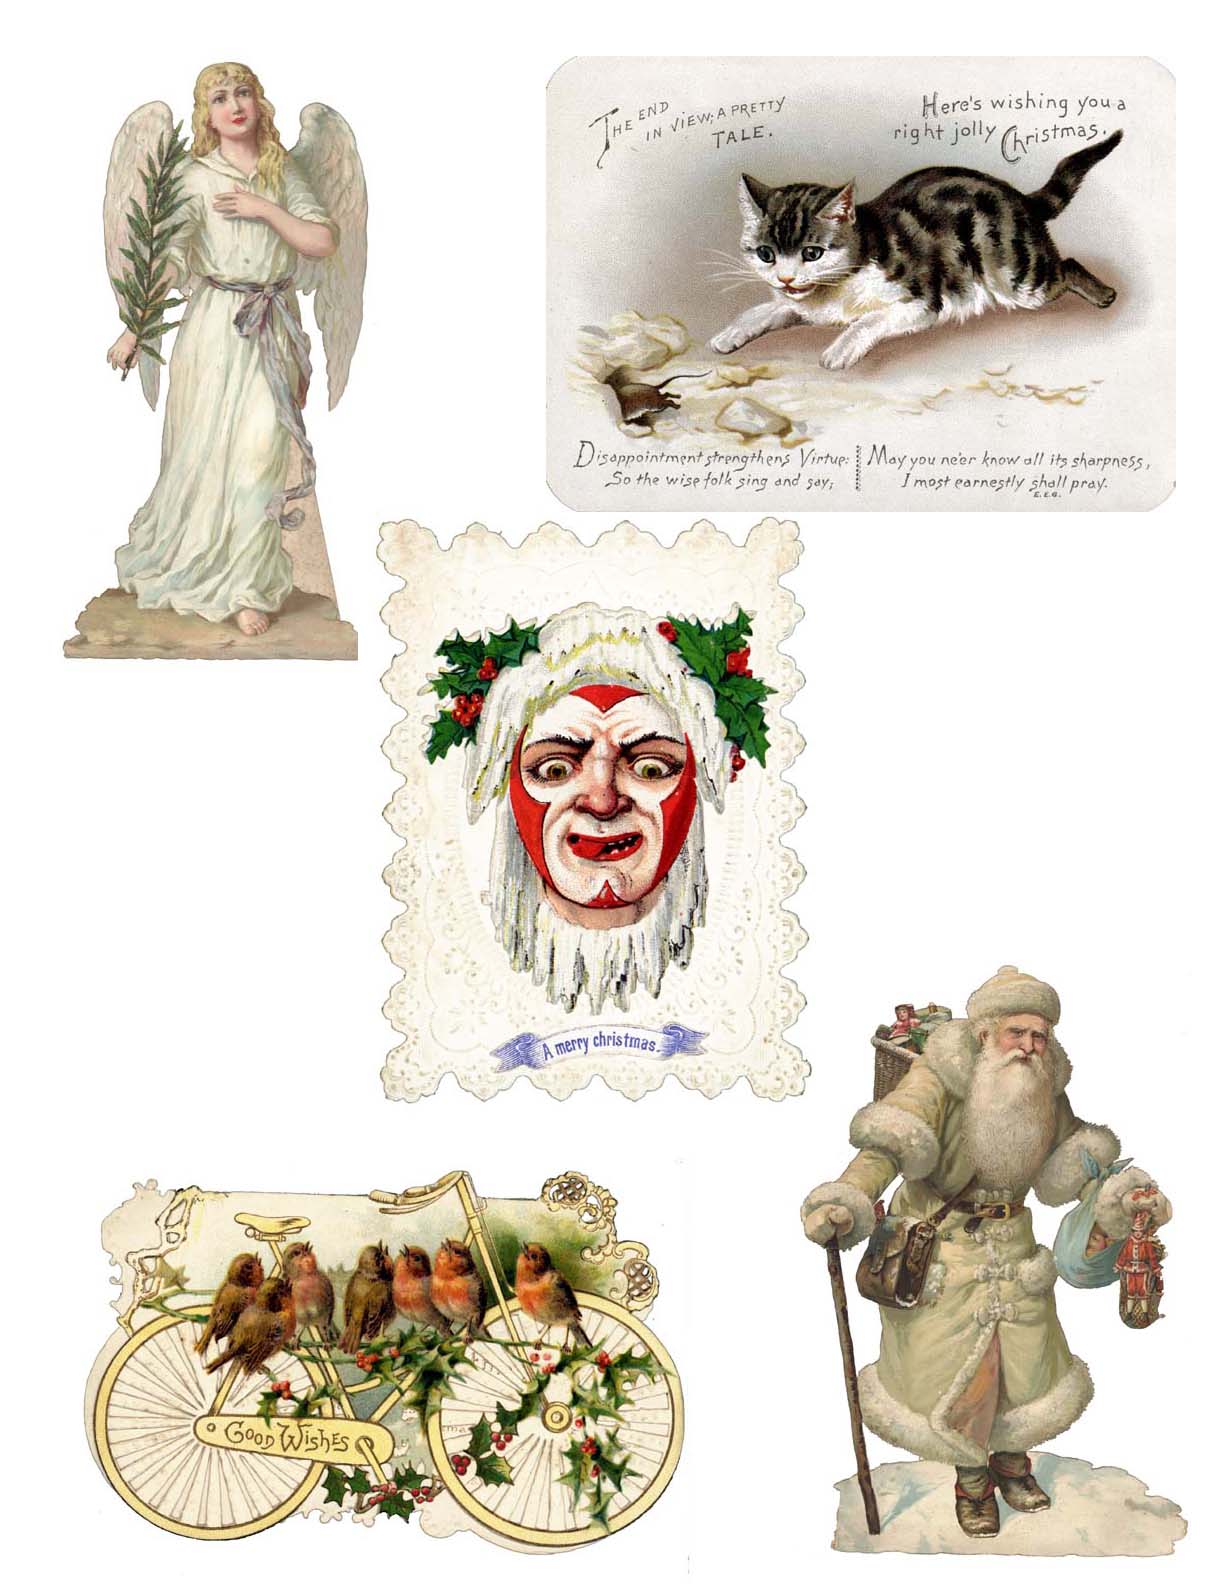 A sample of some of the Victorian Christmas cards including; an angel, a cat chasing a mouse, 'Jack Frost', robins on a bicycle, and a traditional Father Christmas in white.